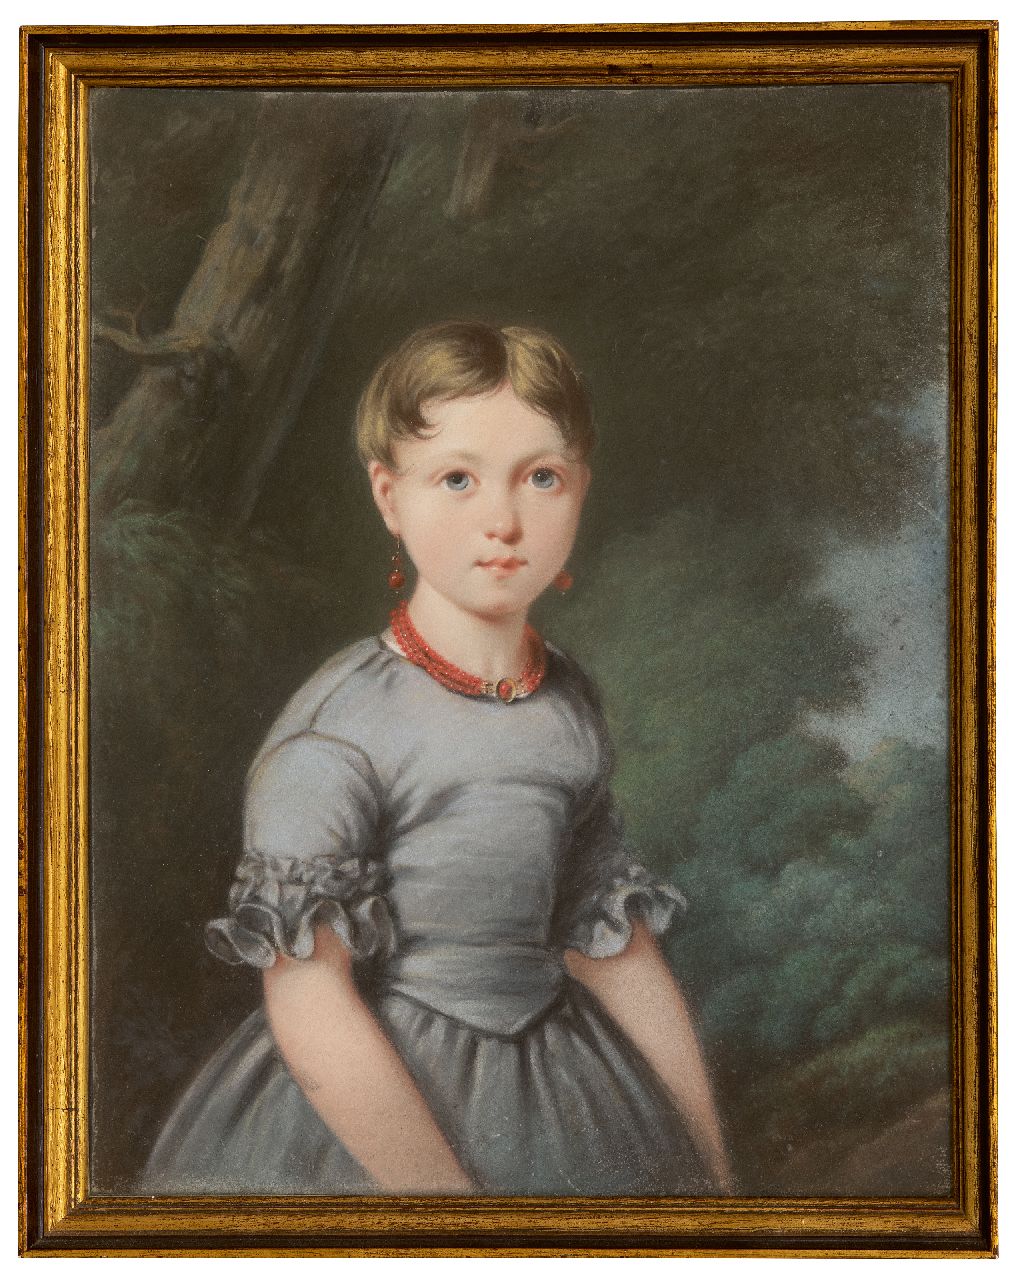 Daiwaille J.A.  | Jean Augustin Daiwaille | Watercolours and drawings offered for sale | Portrait of a girl in a blue dress, presumably Maria Louisa Engelman (1 from 4 portraits), pastel on paper 40.3 x 32.2 cm